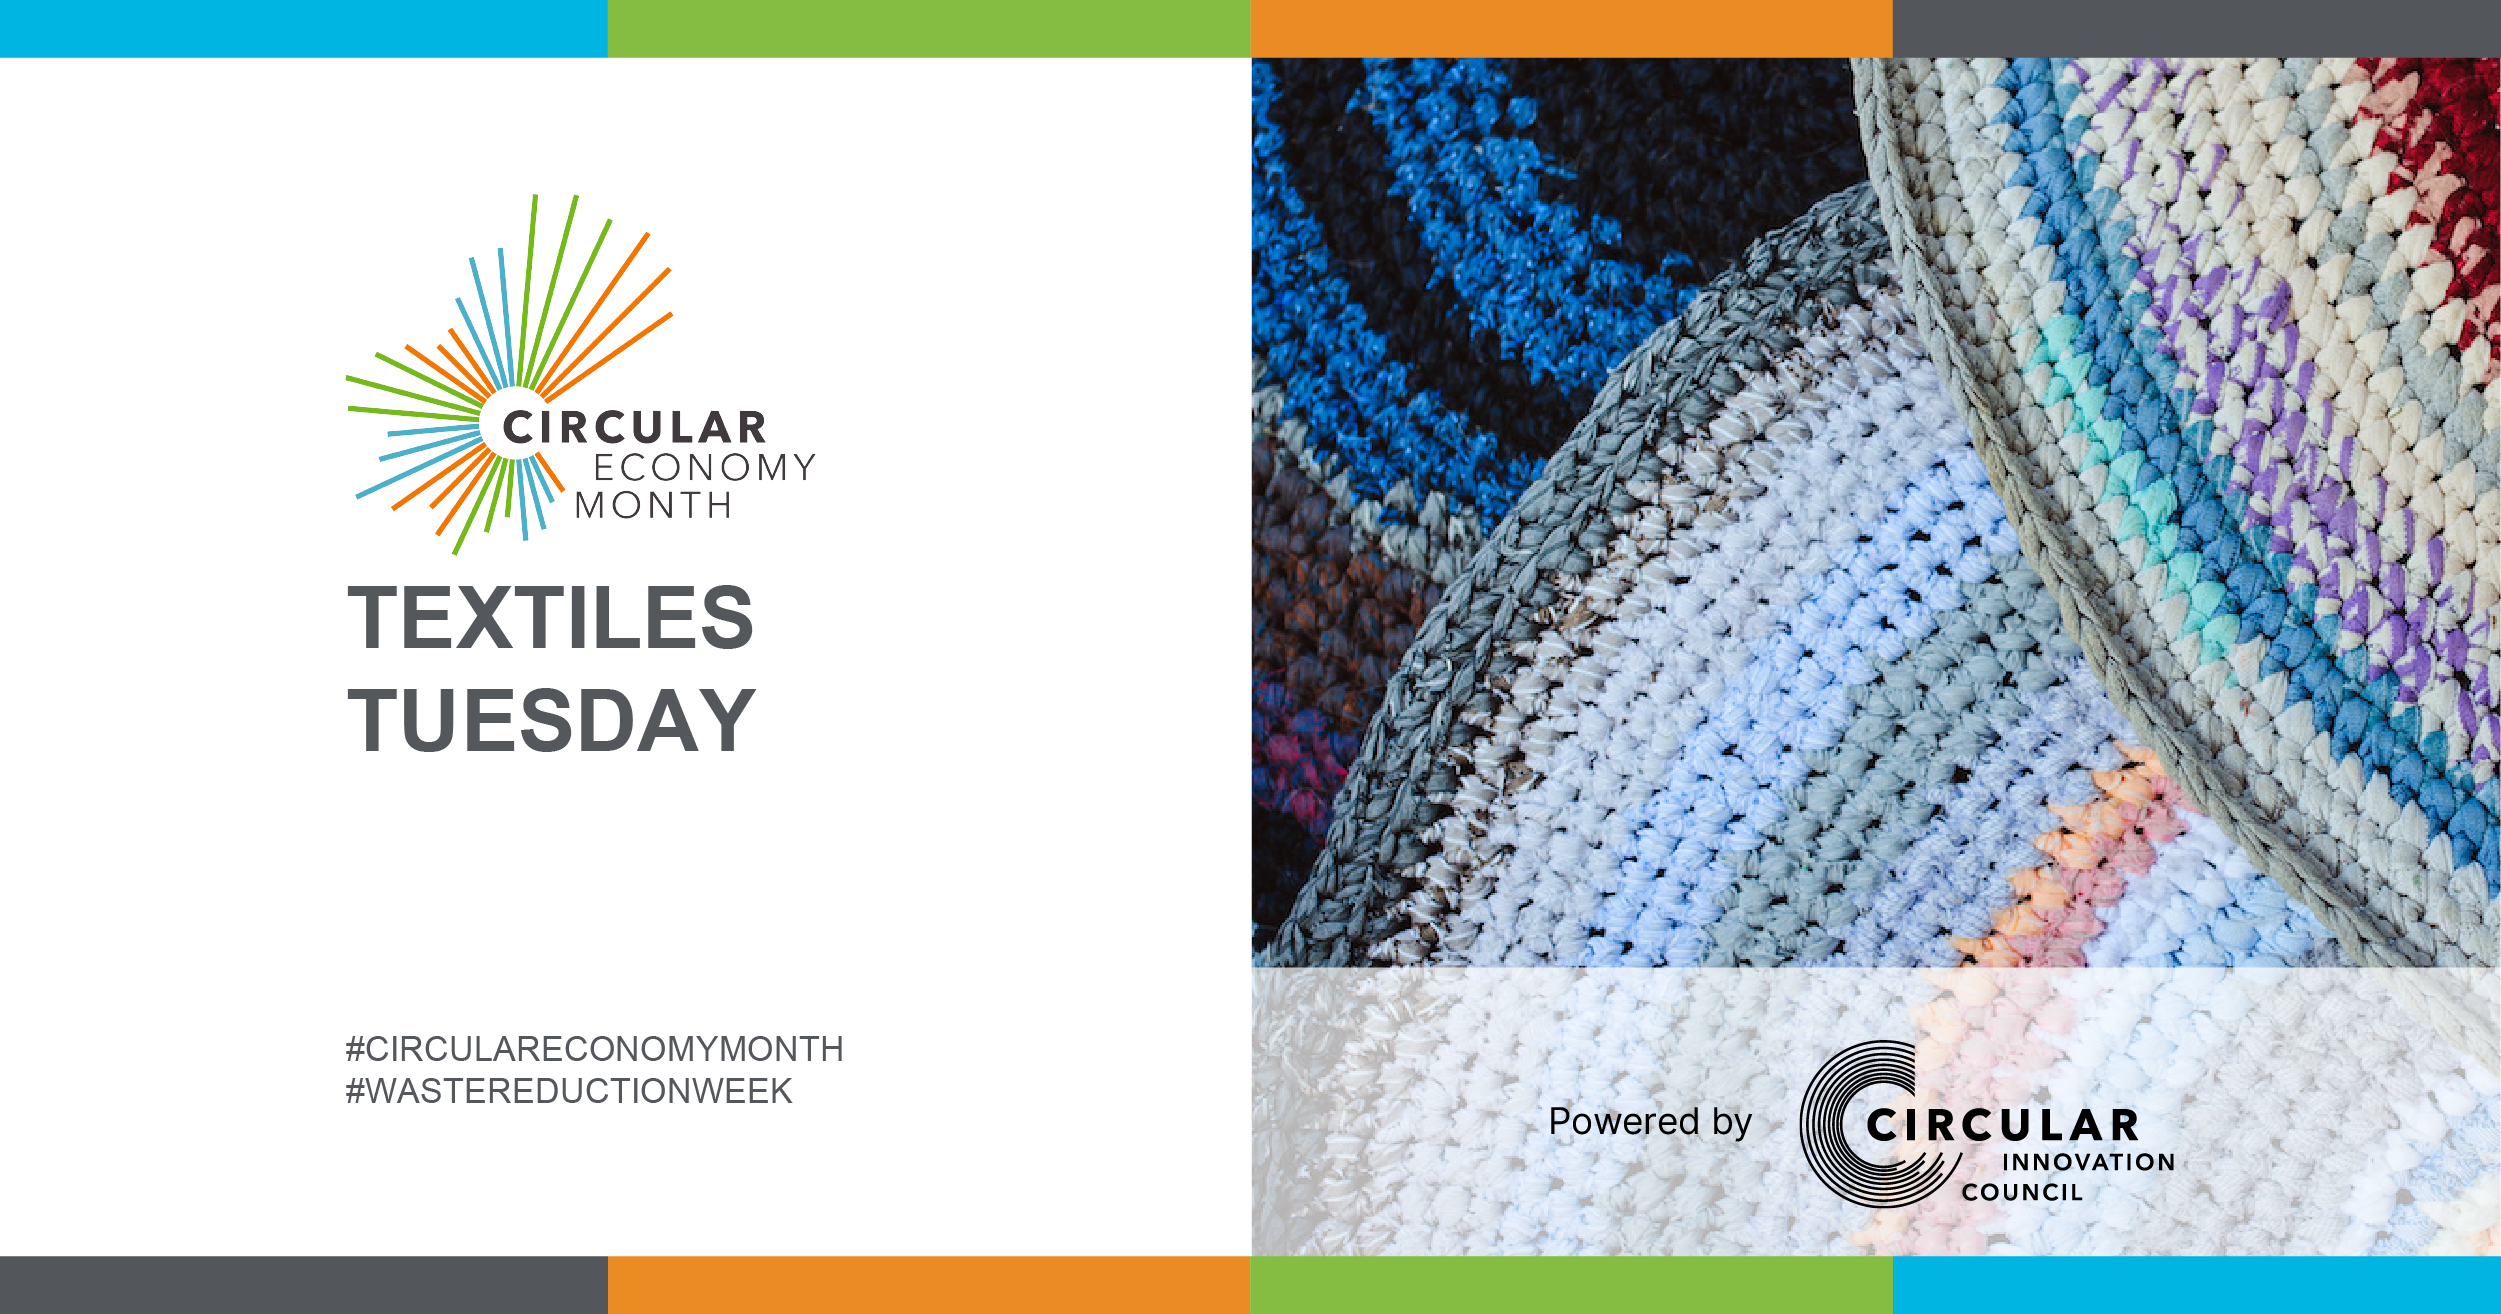 Beautiful, multicoloured, upcycled rugs woven from waste material. Textiles Tuesday. #CircularEconomyMonth #WasteReductionWeek. Circular Economy Month, powered by Circular Innovation Council.